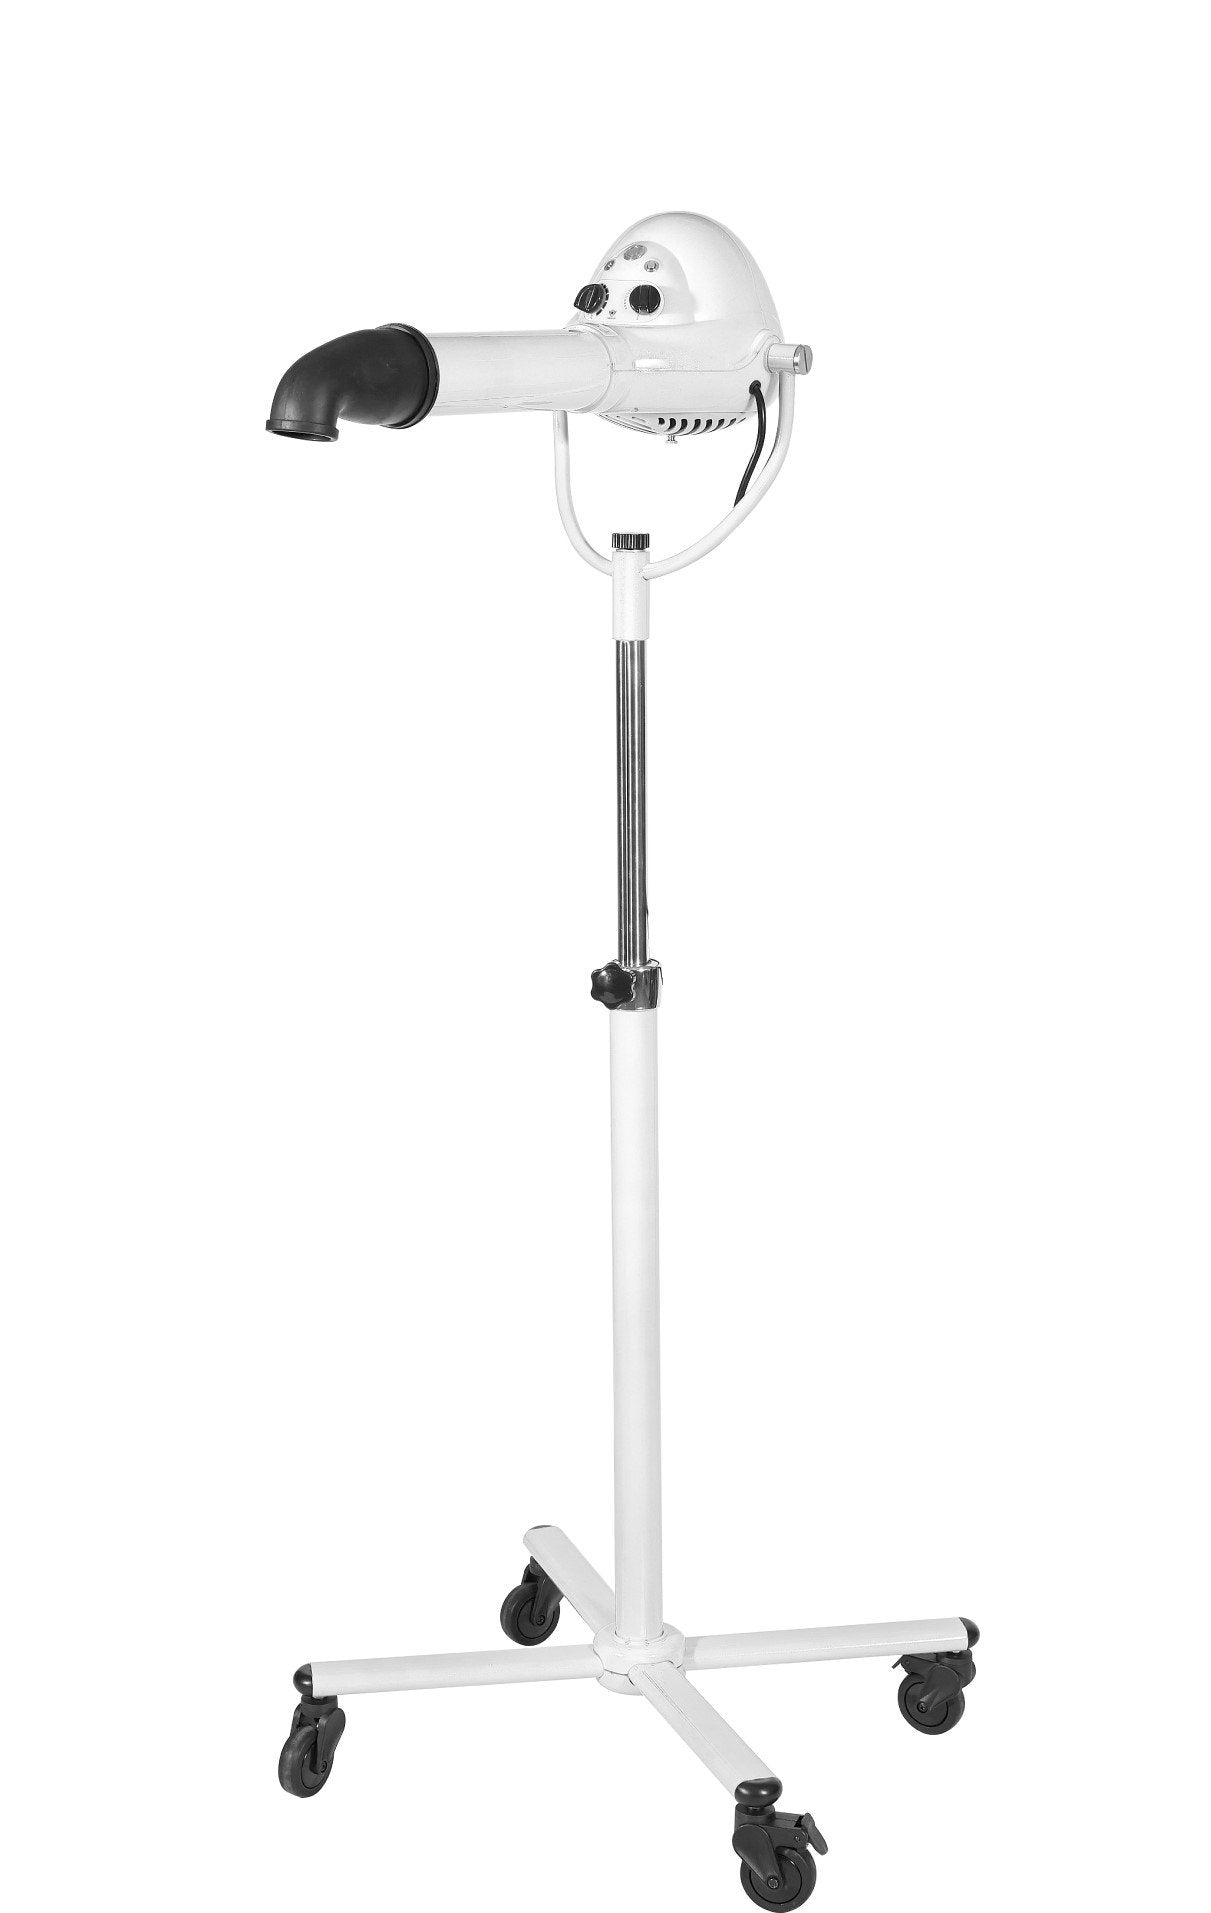 Aeolus TD-906 Ionic Dog Grooming Stand Dryer-Dog Grooming Dryer-Pet's Choice Supply